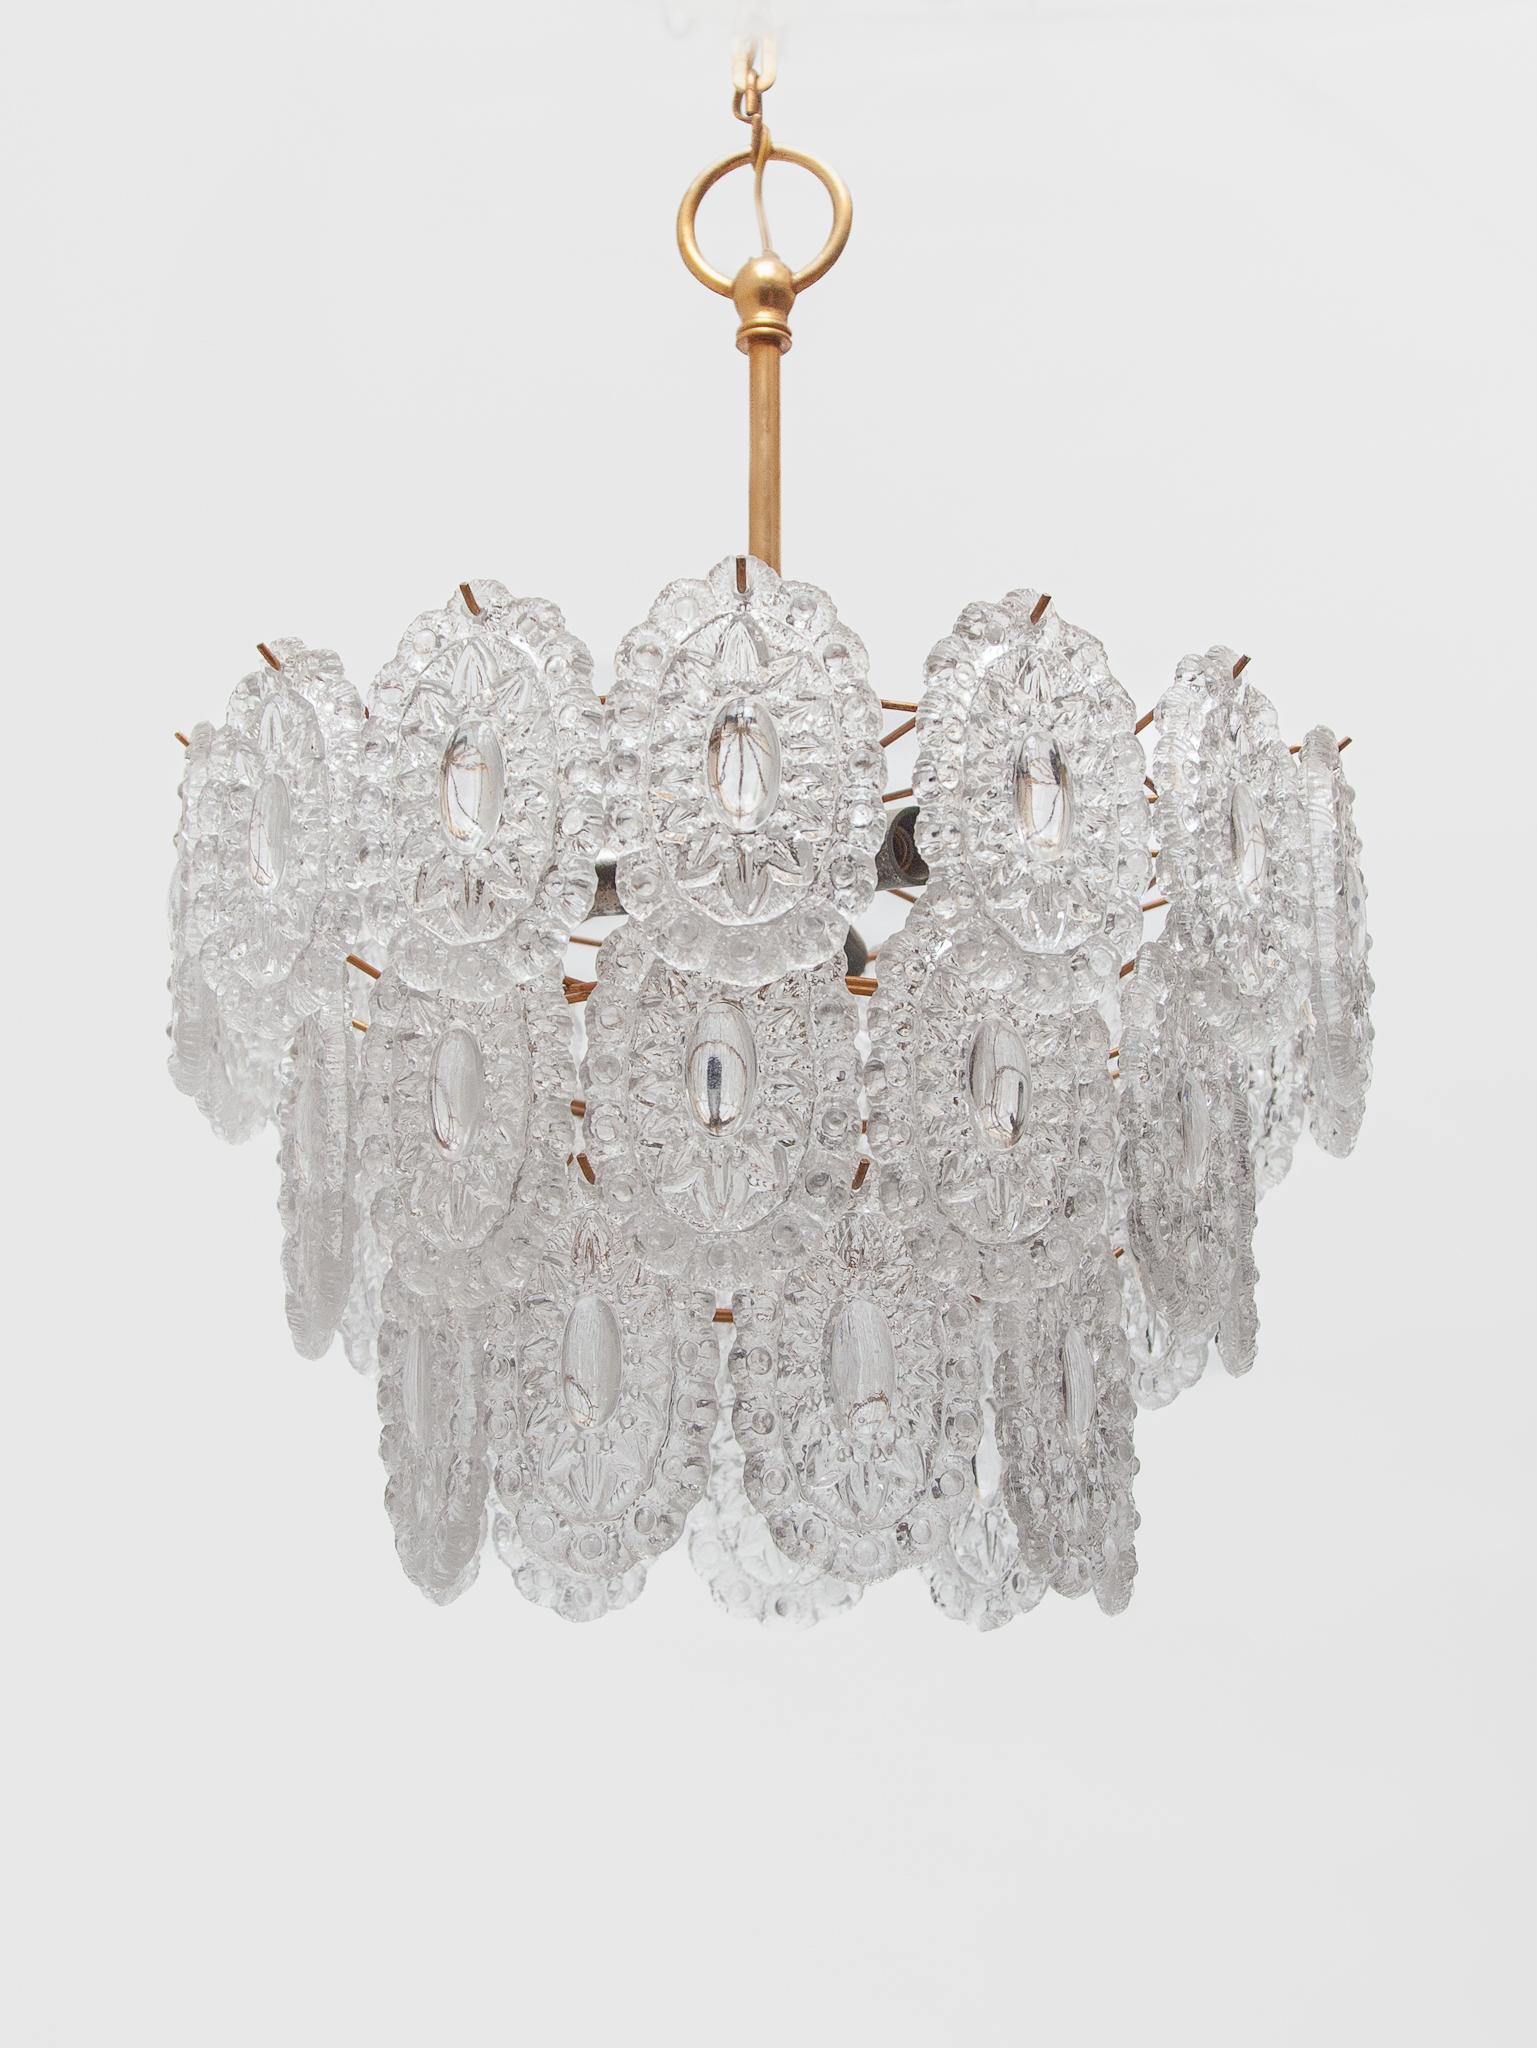 This Massive Rosette crystal glass chandelier with a brass frame made in the style of the famous Murano chandeliers with hand blown round discs in many colours. These discs are made of pressed crystal glass and are all the same. The glass was made